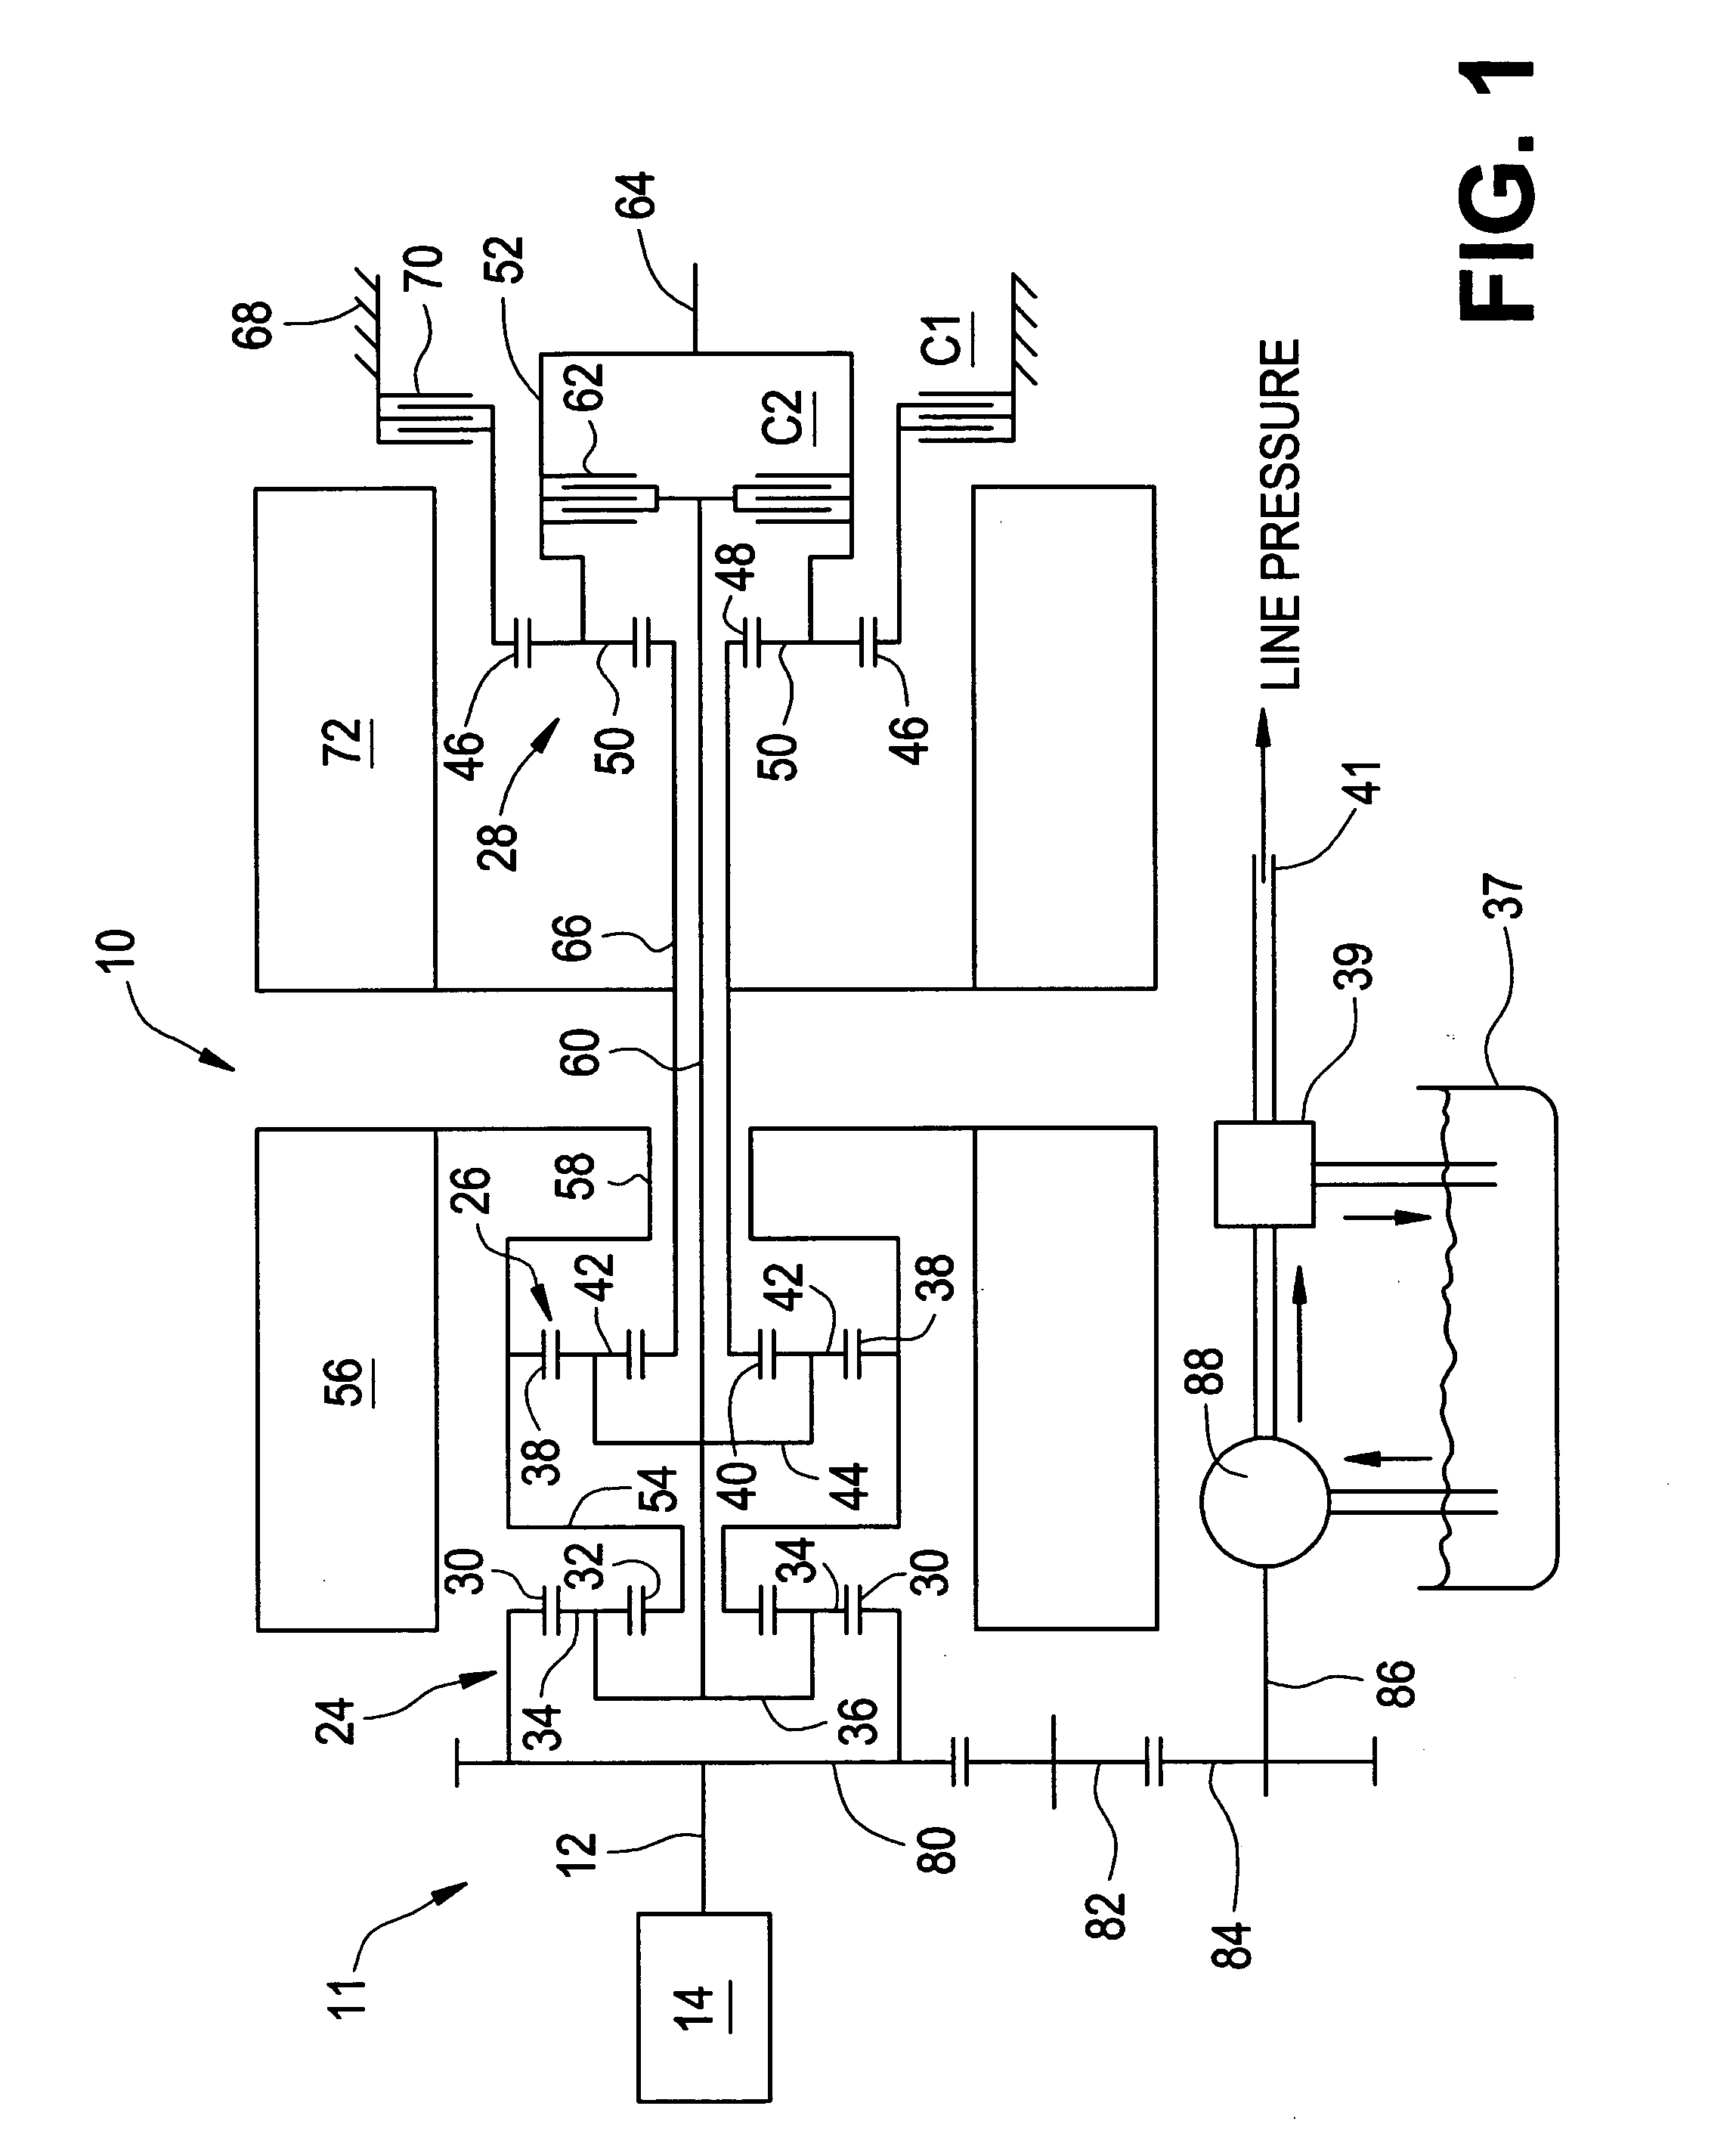 Method for dynamically determining peak output torque in an electrically variable transmission